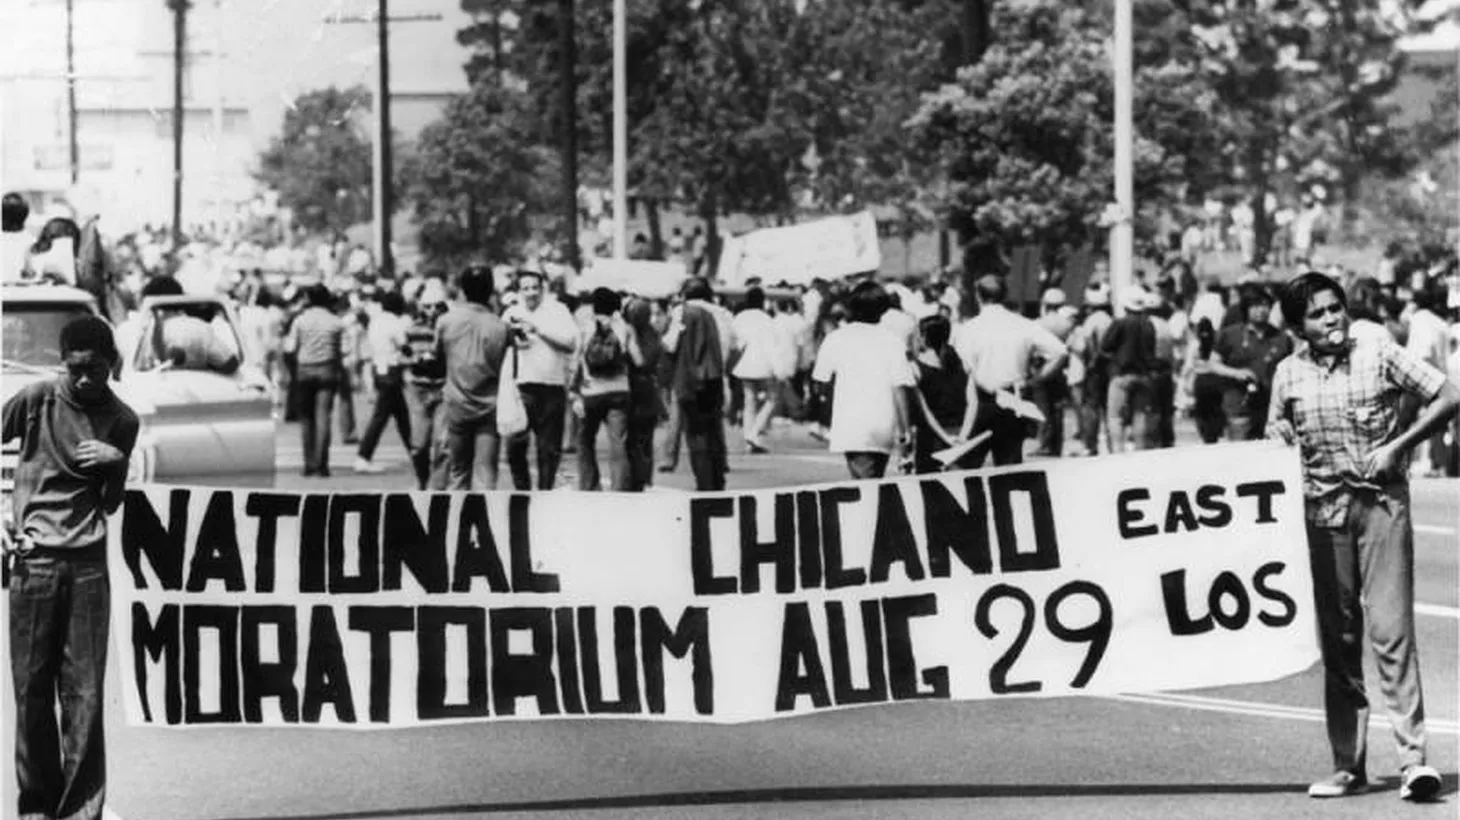 Two young men hold a banner that says "National Chicano Moratorium, East Los Angeles, August 29."